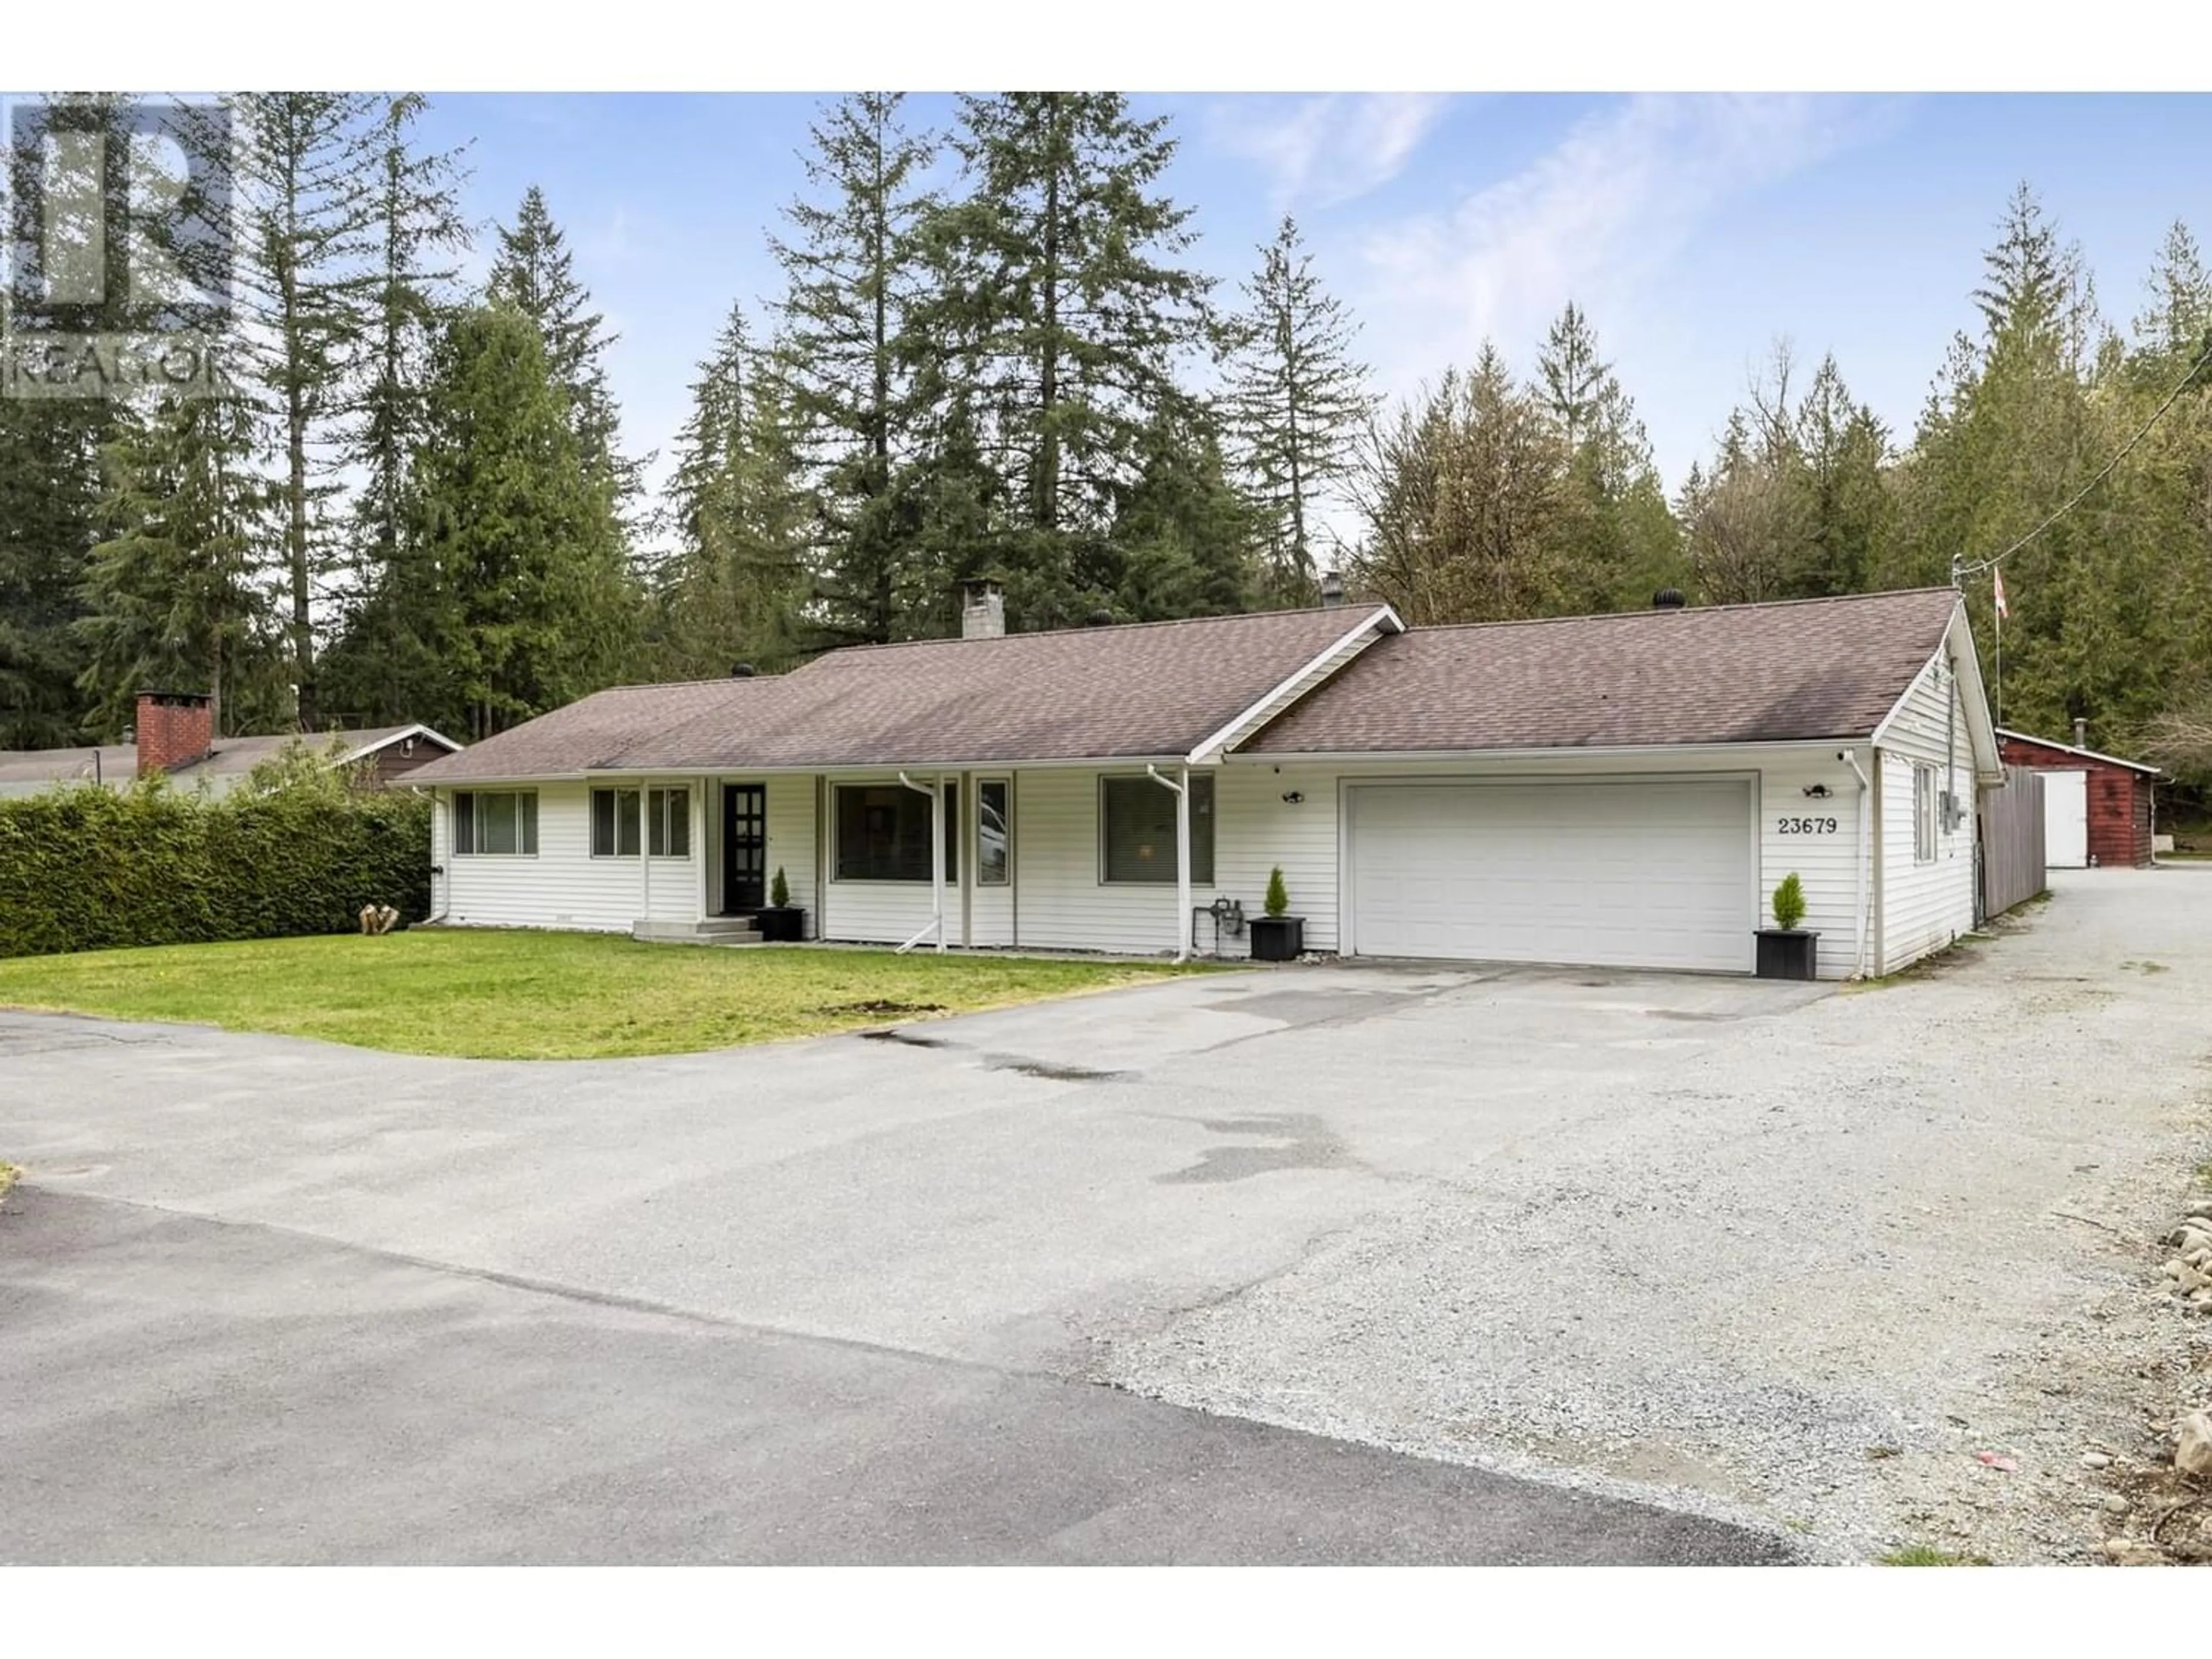 Frontside or backside of a home for 23679 FERN CRESCENT, Maple Ridge British Columbia V4R2S9